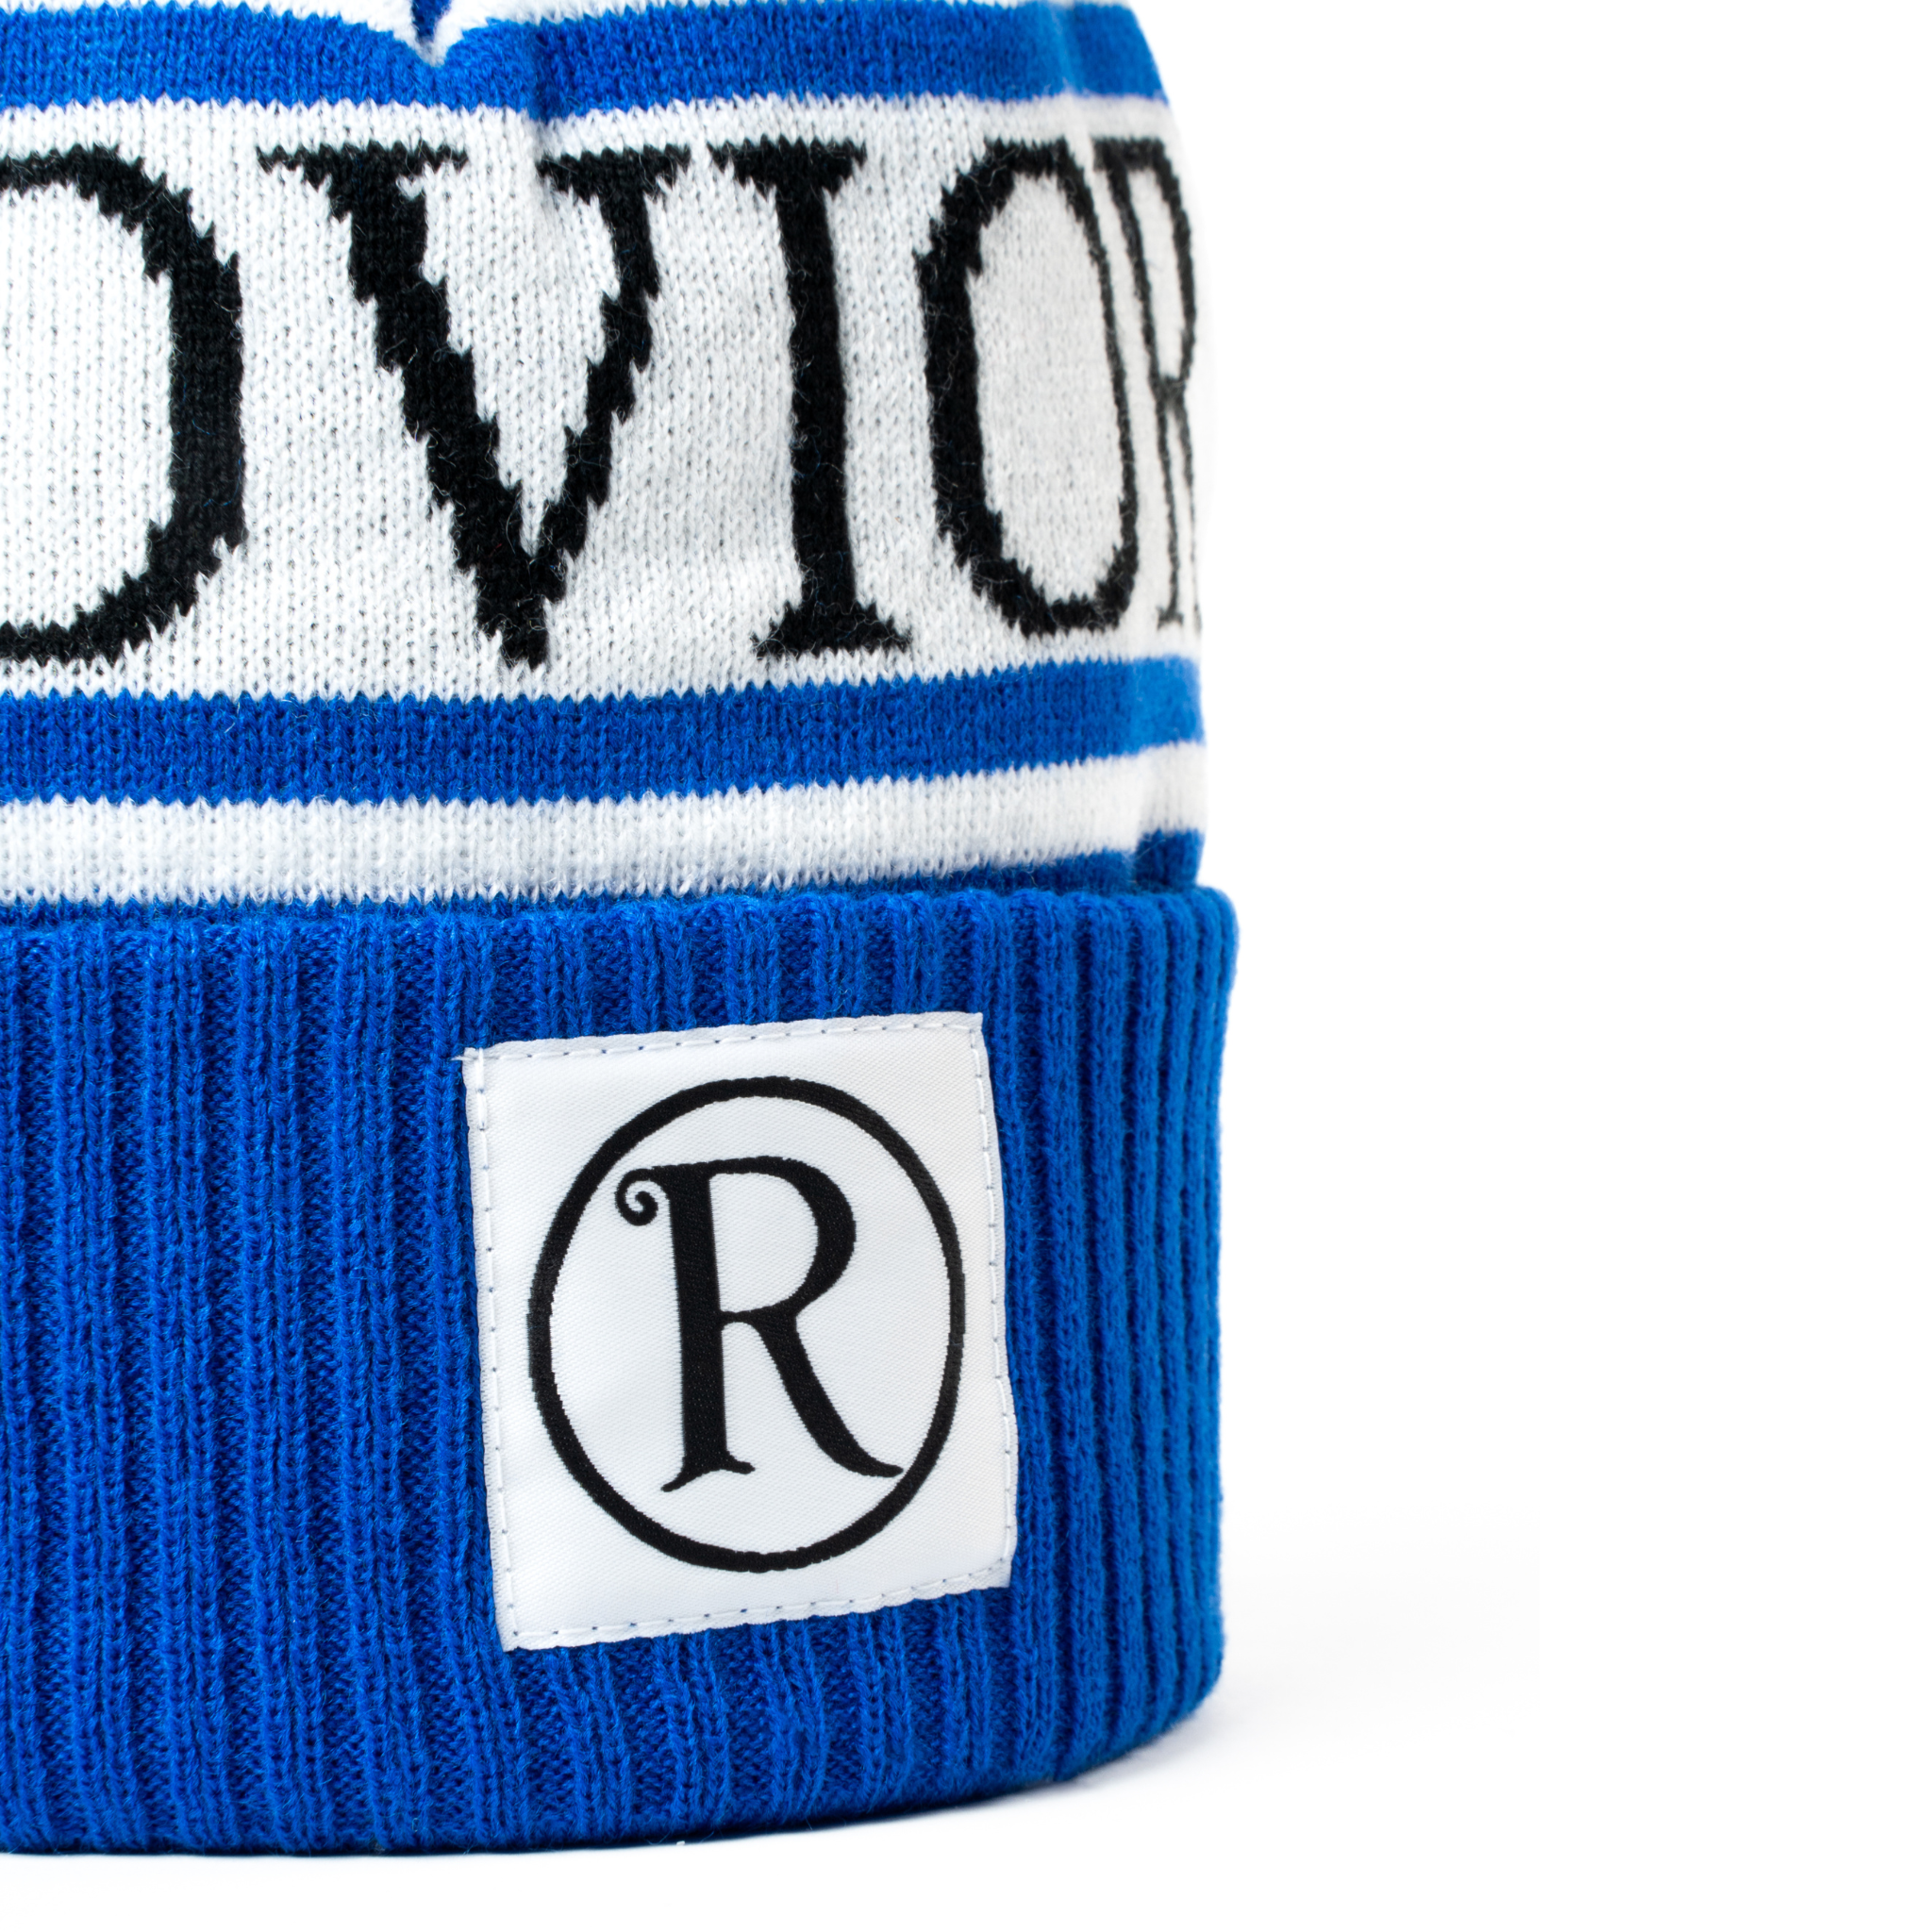 The "Knitted Blue Fluffy Beanie"